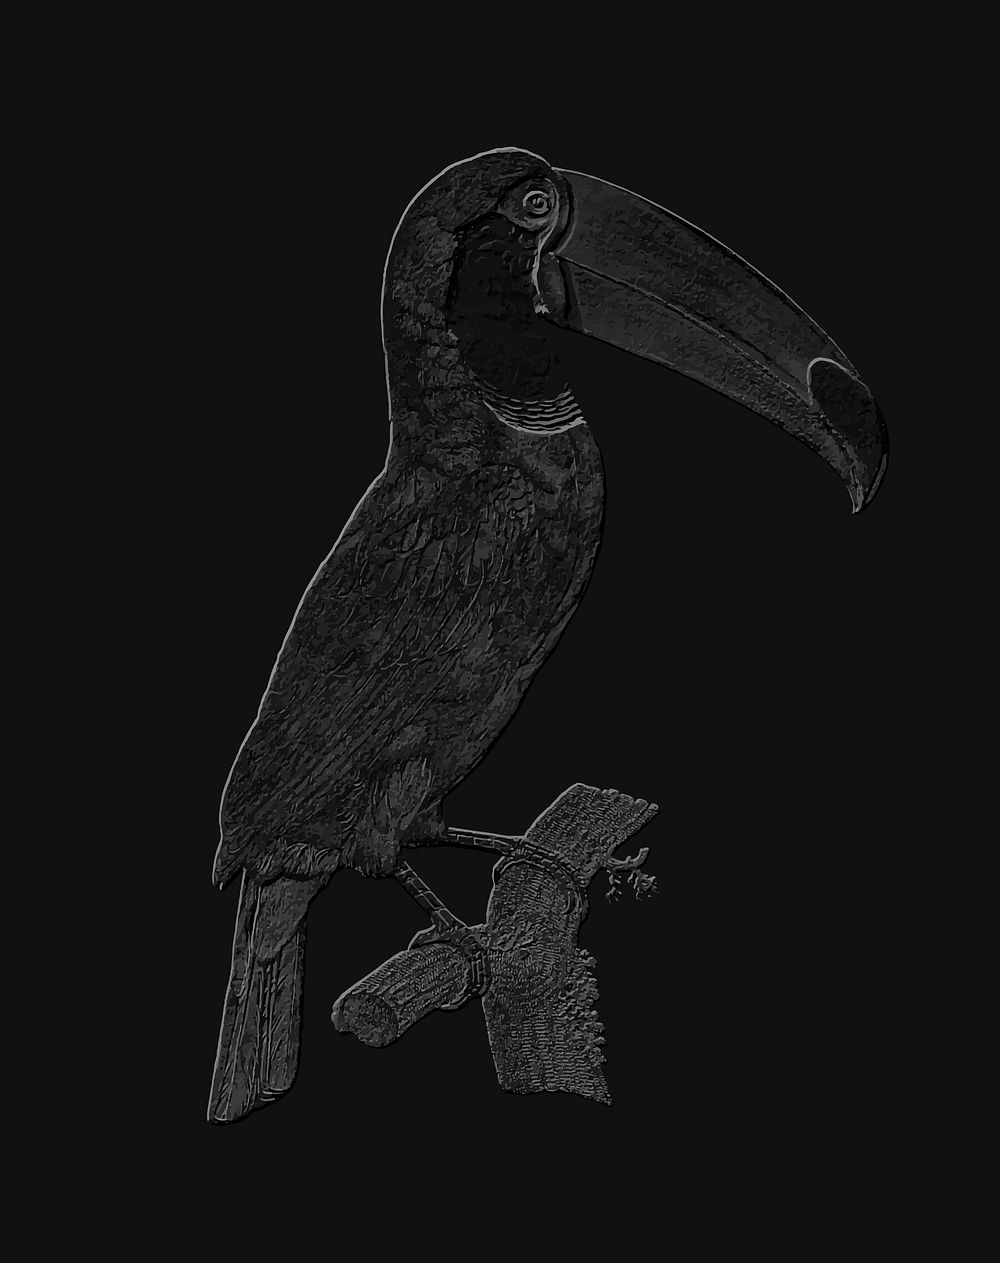 Embossed Toco toucan vintage vector, remix from original artwork.